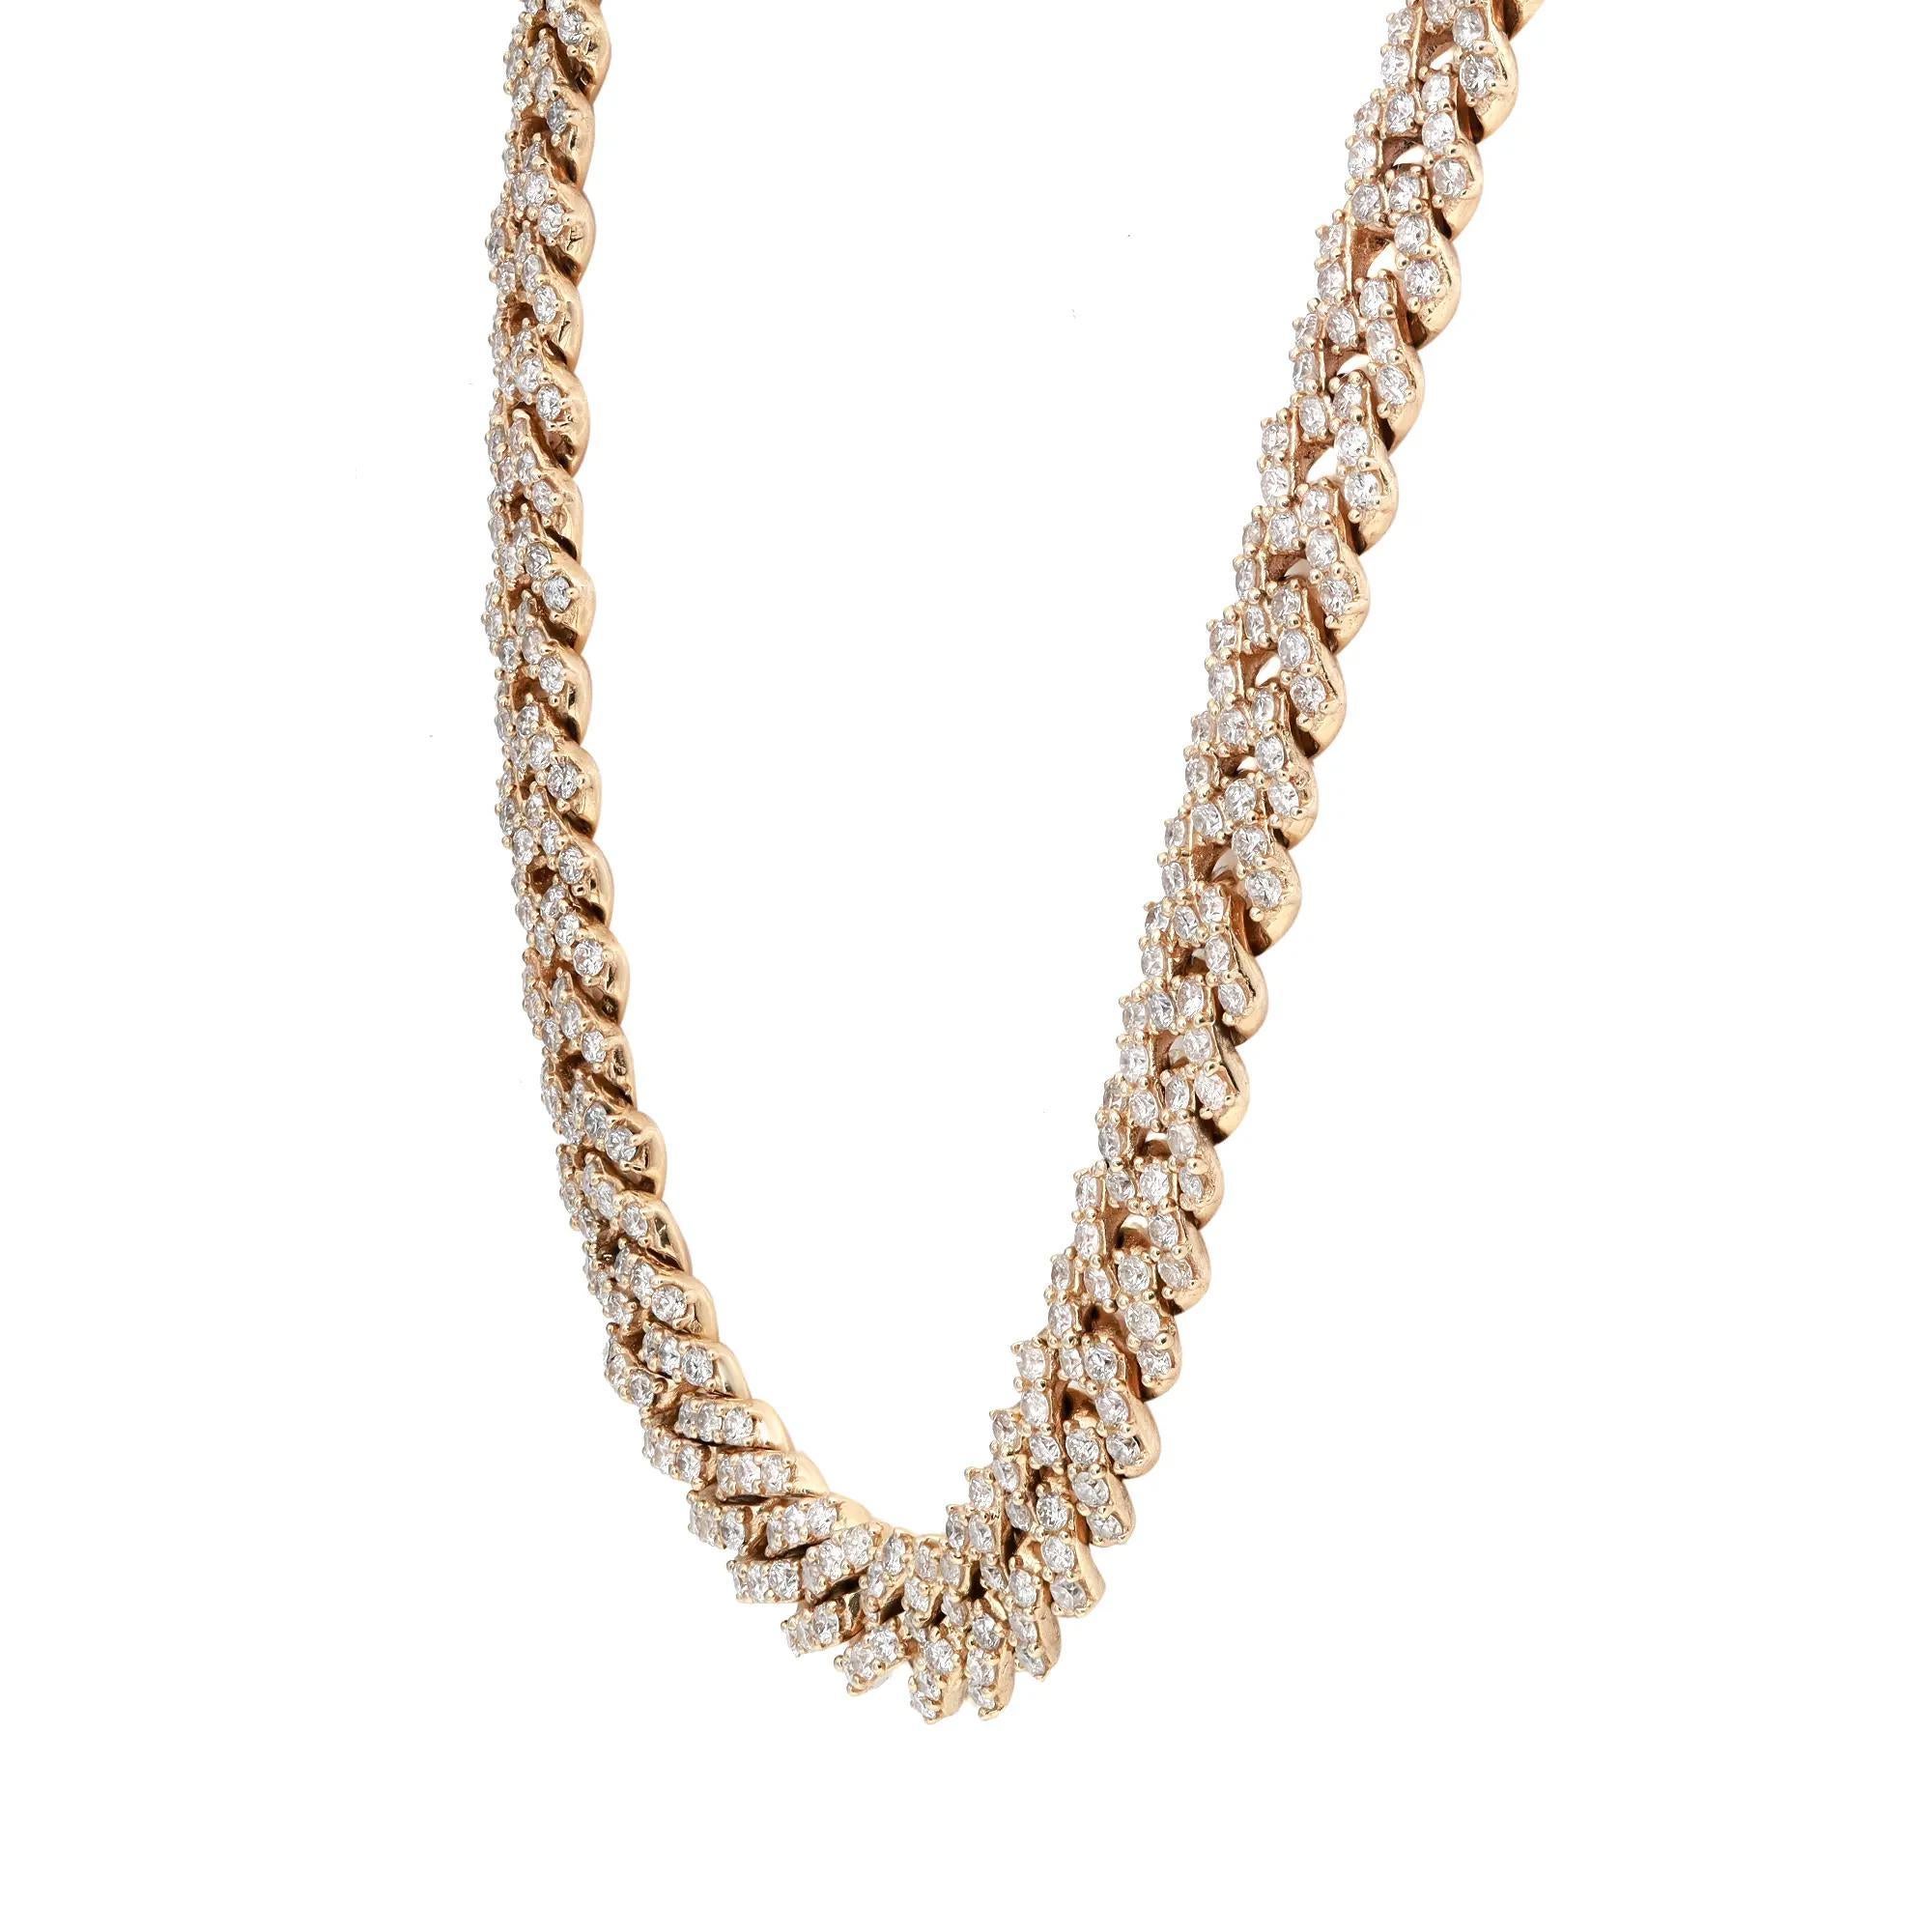 This luxury full diamond Cuban link statement necklace is set with 801 pave set round brilliant cut shimmering diamonds totaling 8.43 carats. Diamond quality: H color and SI-I clarity. Beautifully handcrafted in 18K yellow gold. This necklace is